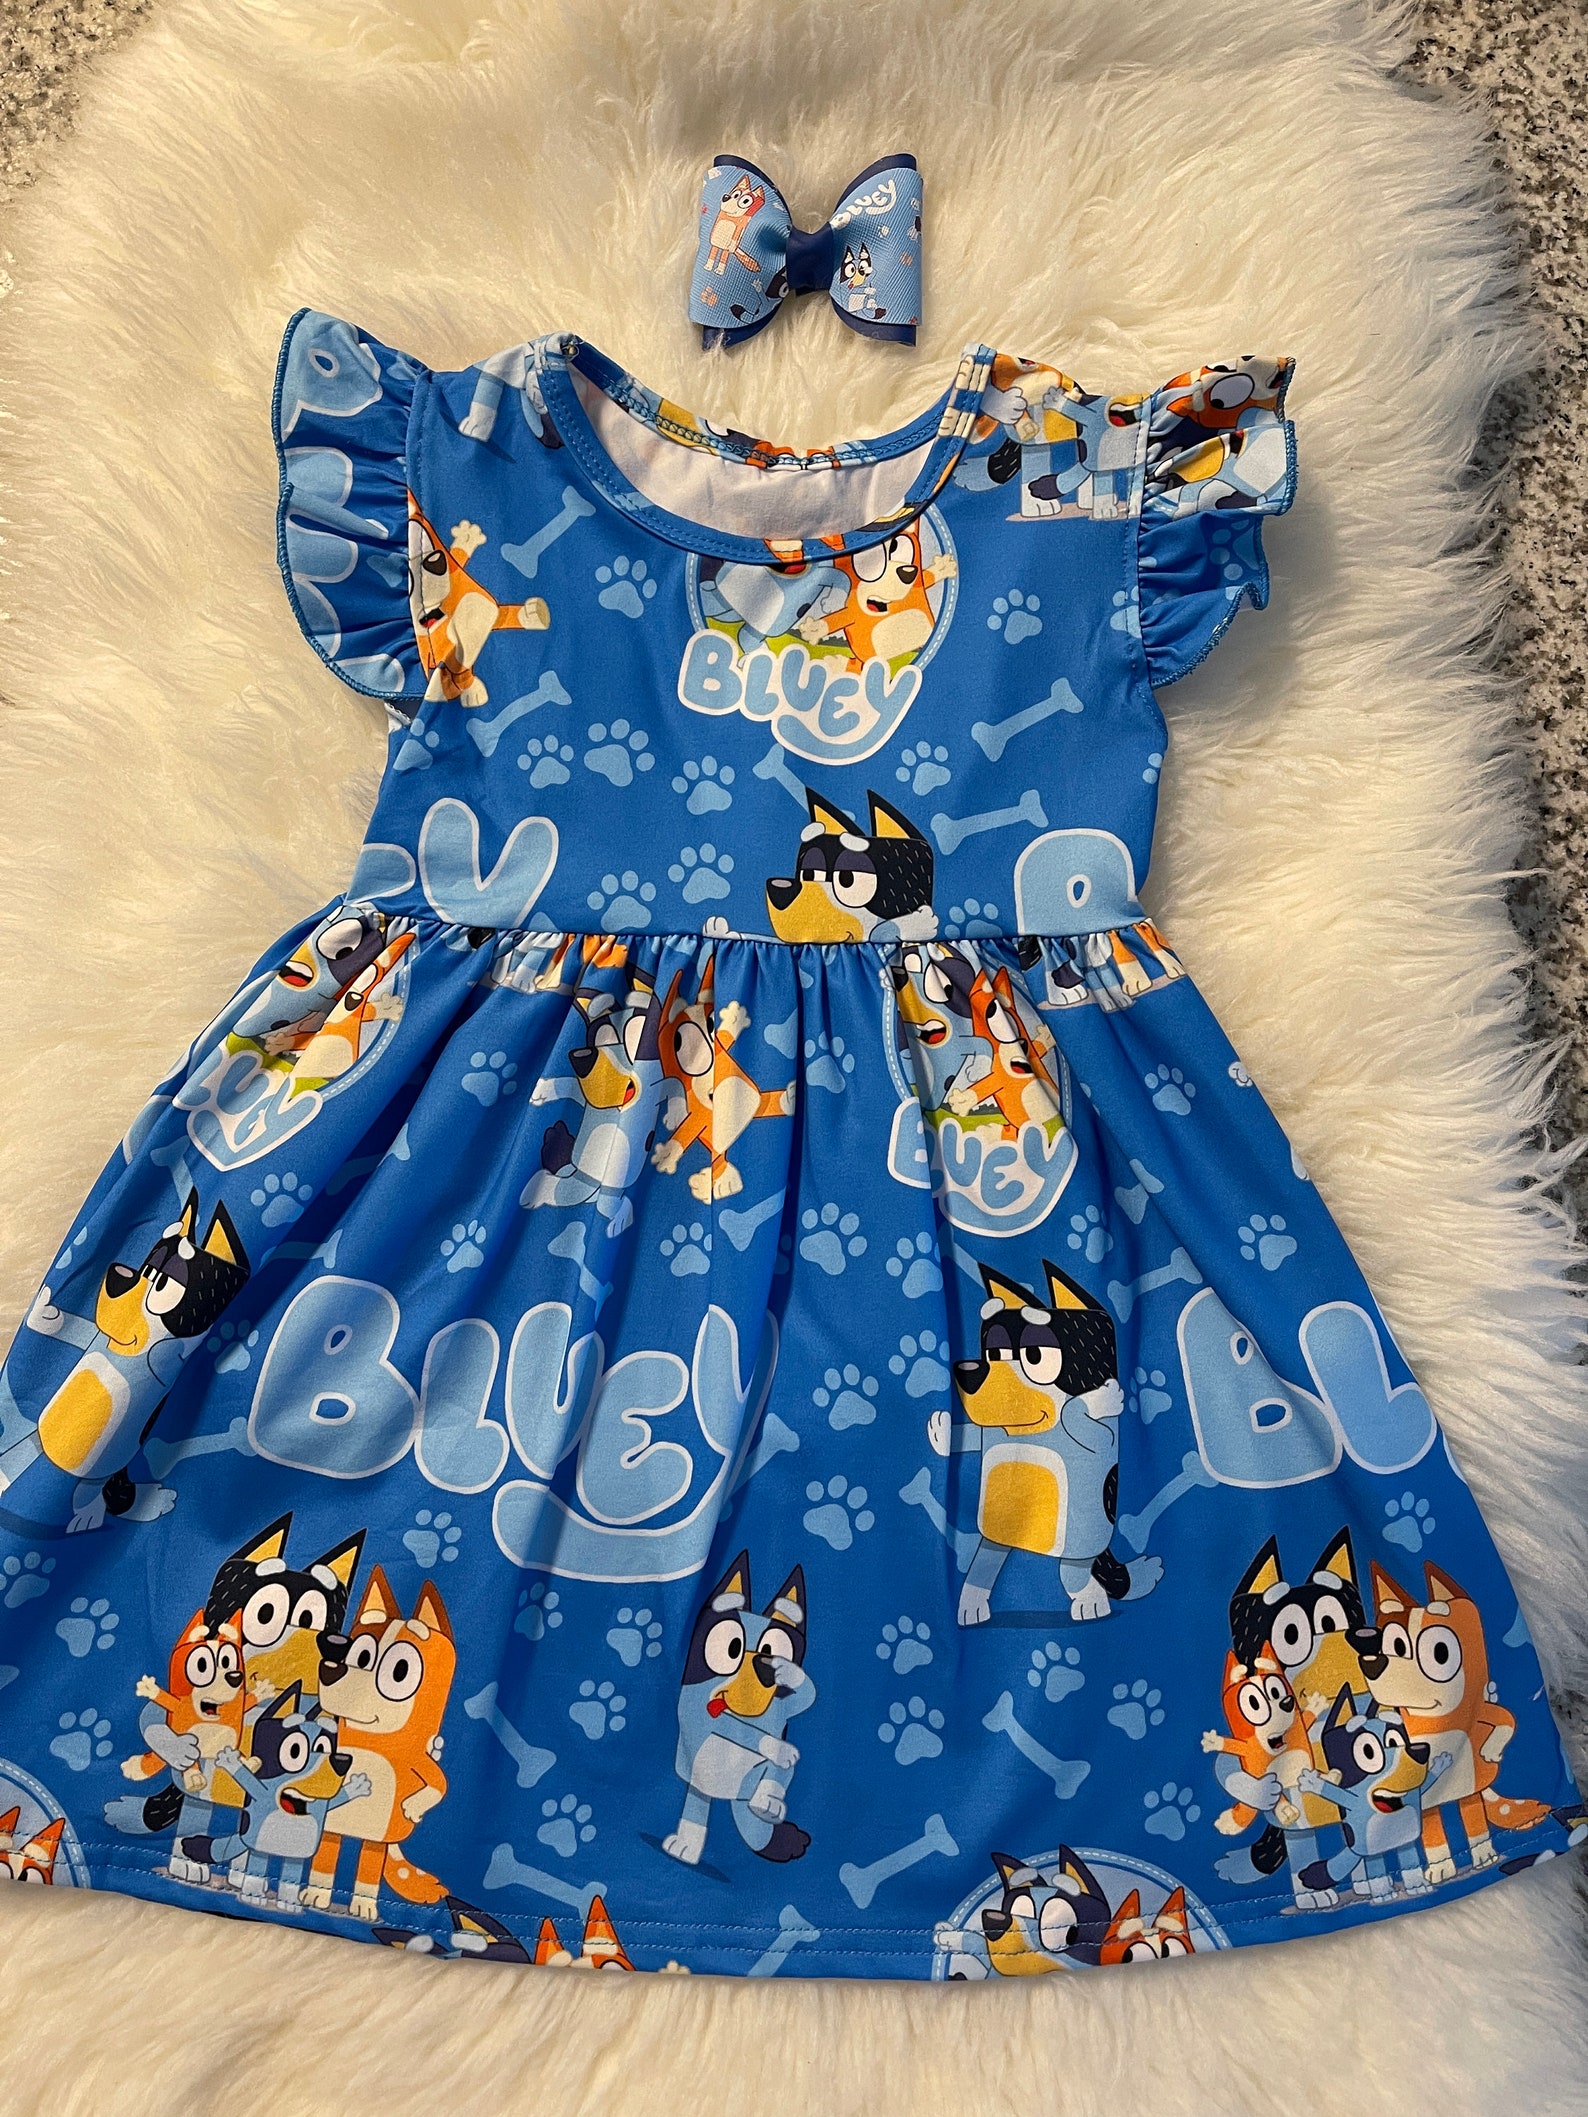 Bluey Inspired new blue dress Fast shipping from US | Etsy